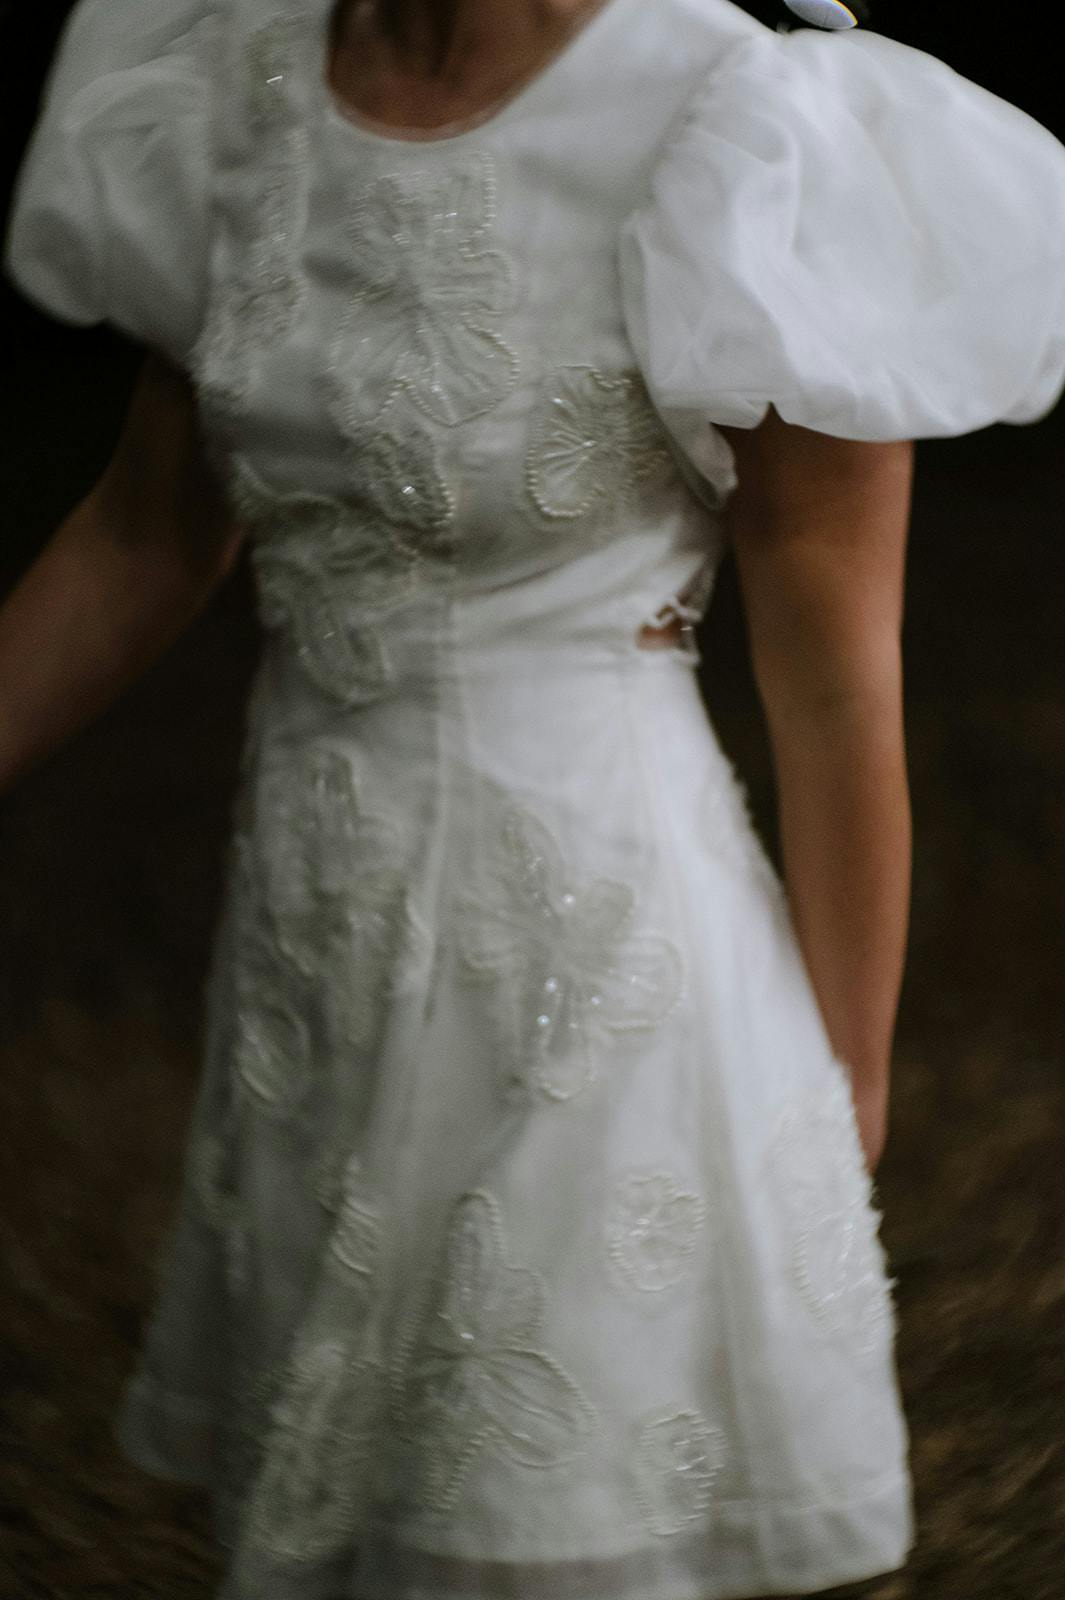 A person wearing a white dress adorned with intricate floral embroidery and voluminous puff sleeves. The image is slightly blurred, making the details somewhat indistinct. The person is partially visible from the shoulders to mid-thigh.